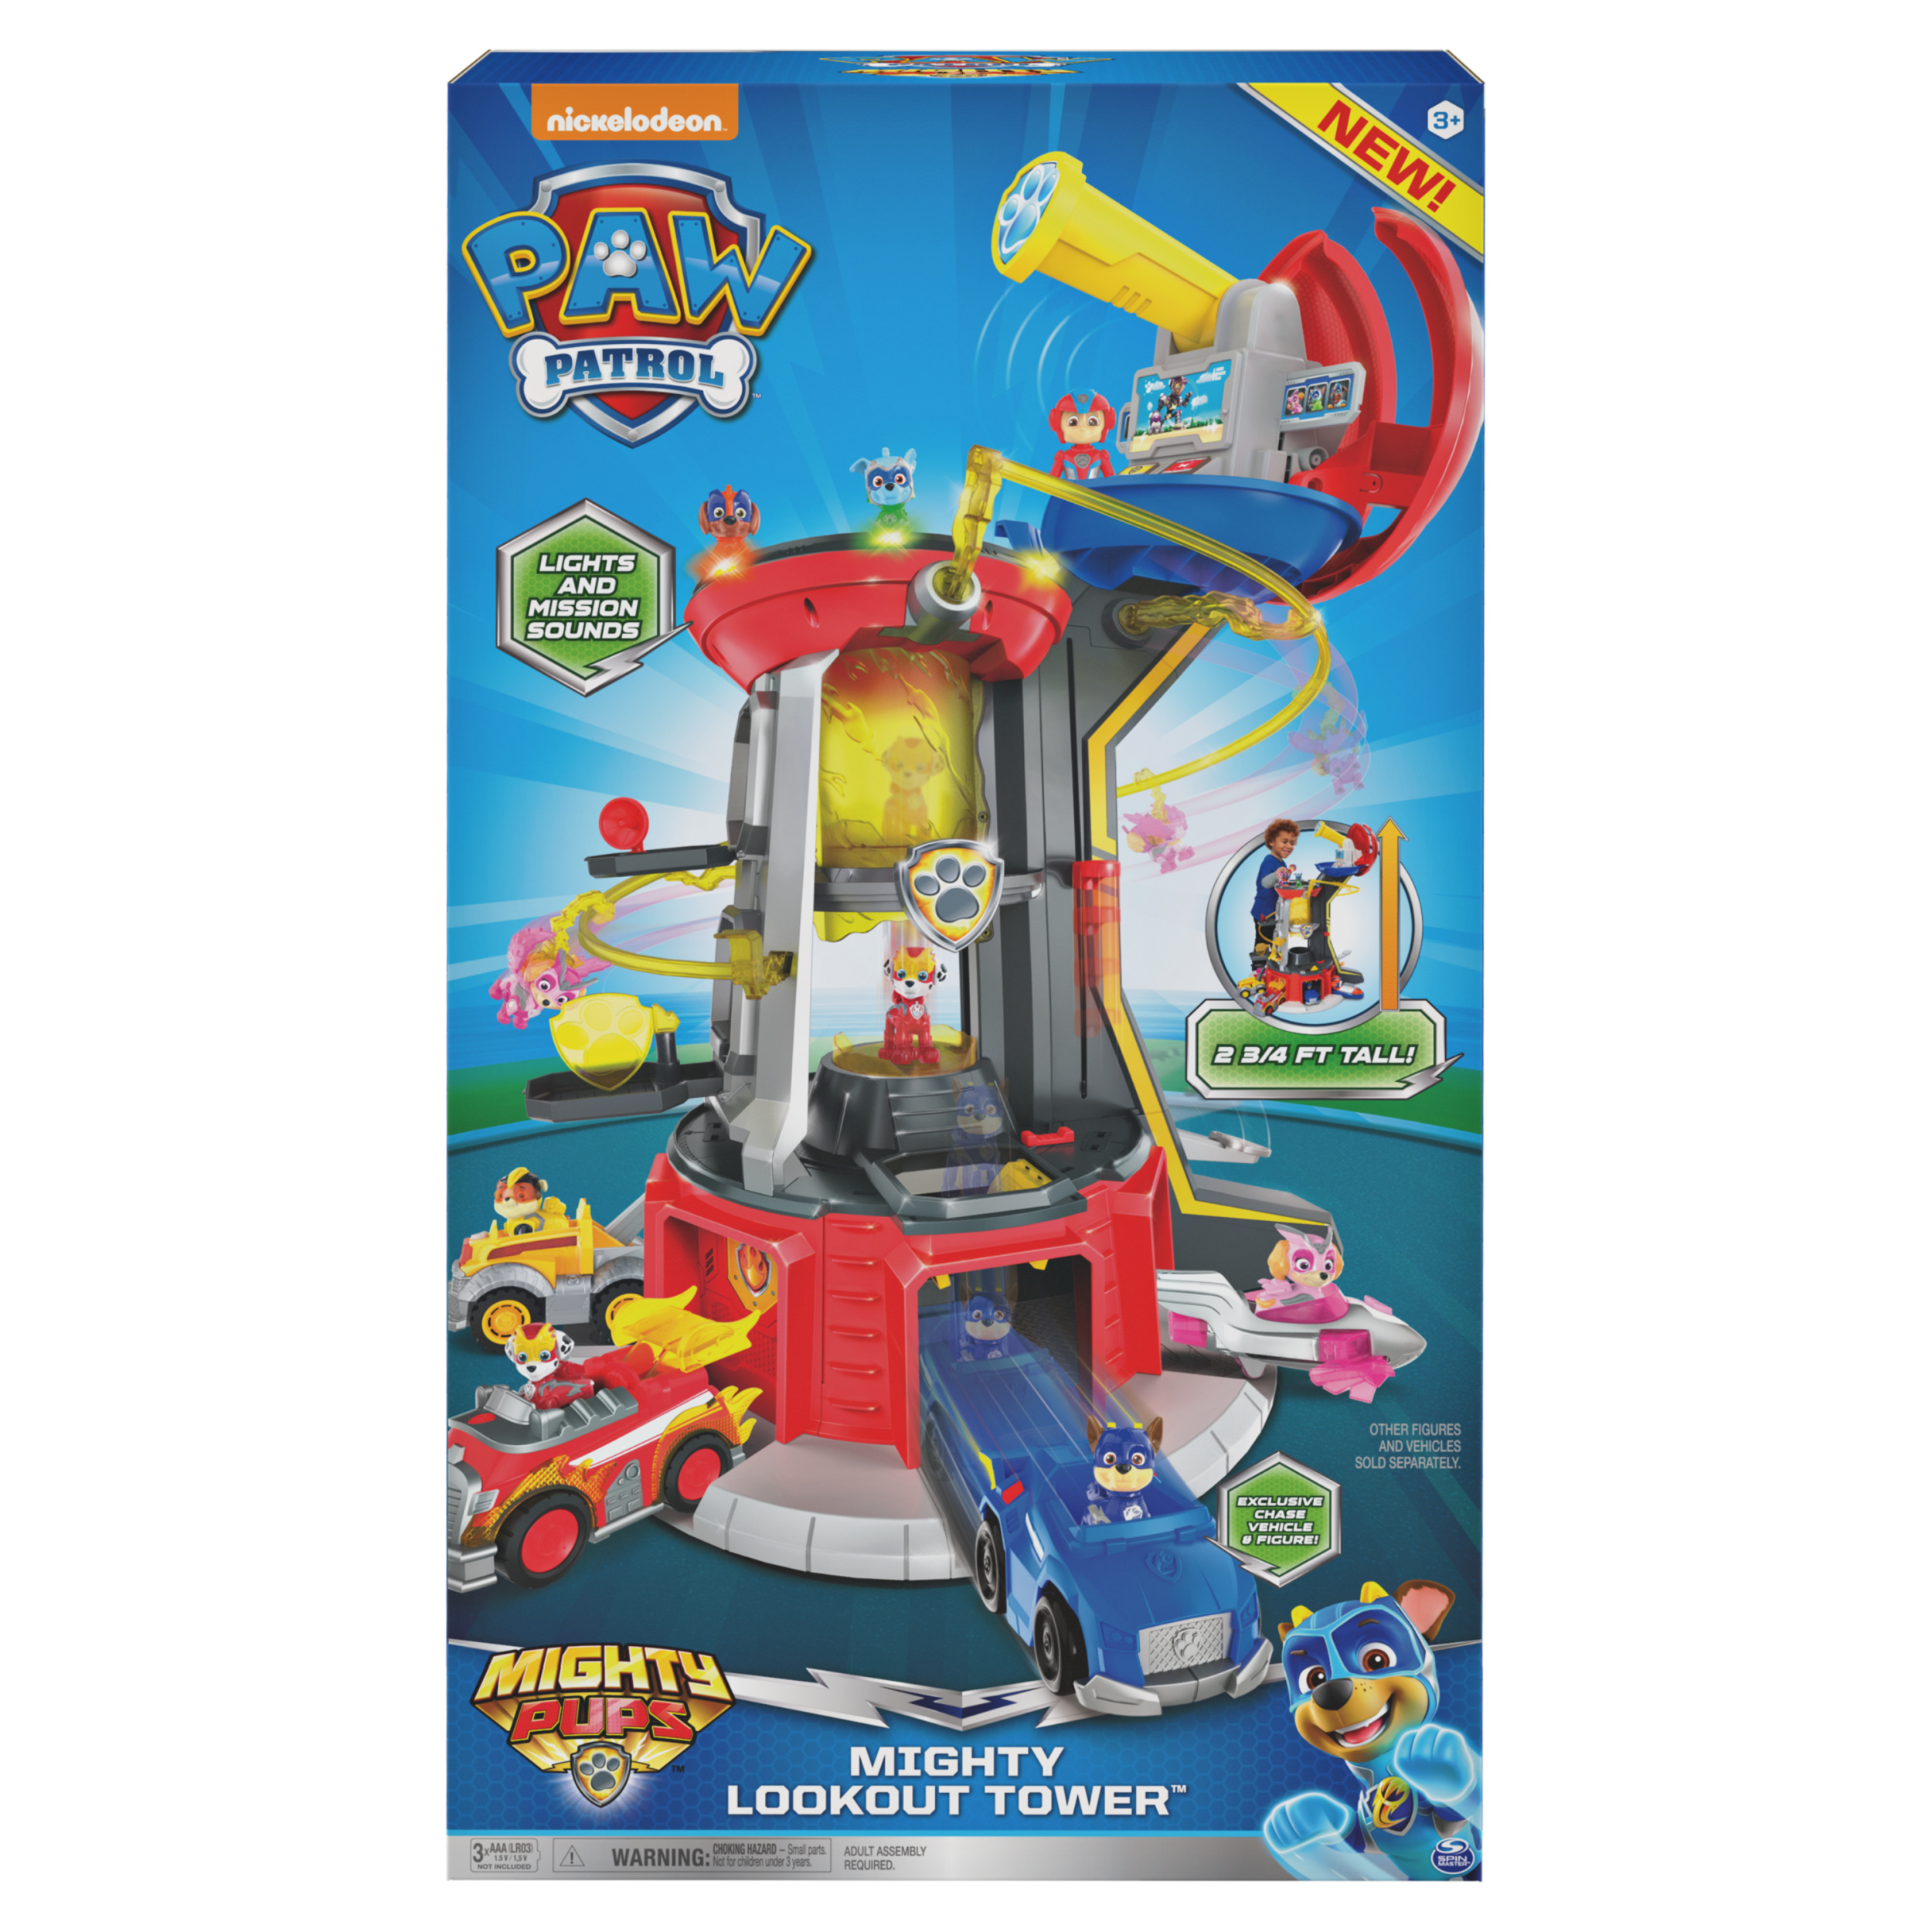 PAW Patrol, Mighty Pups Super PAWs Lookout Tower Playset with Lights and Sounds, Toy for Ages 3 and Up - image 3 of 9